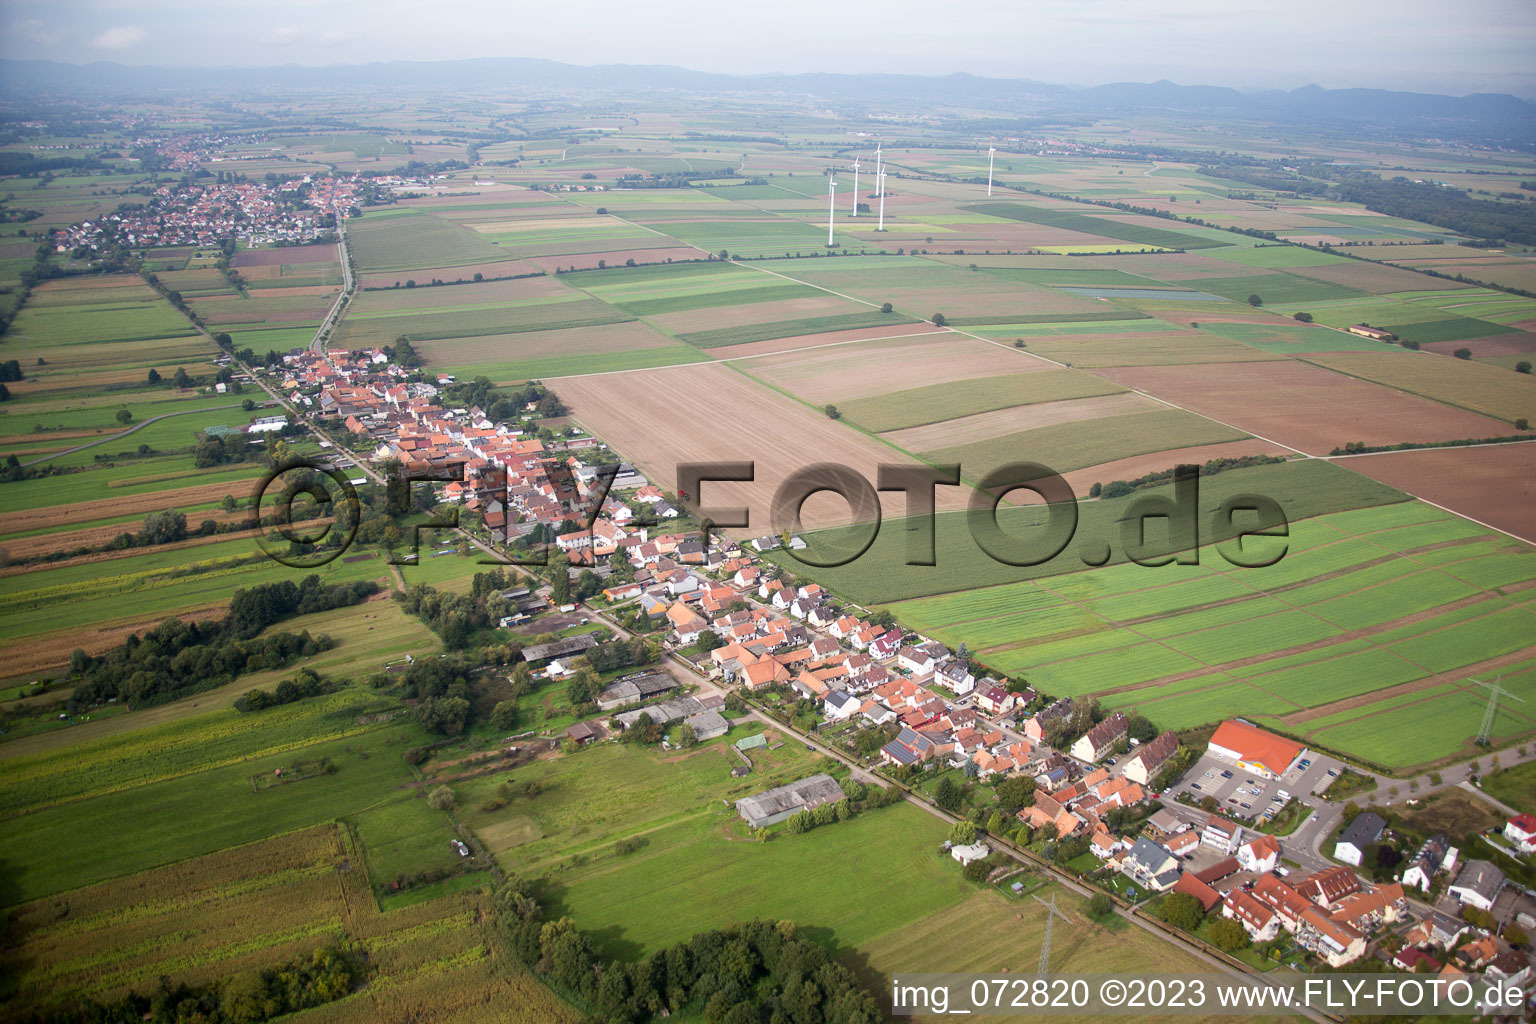 Kandel in the state Rhineland-Palatinate, Germany from above